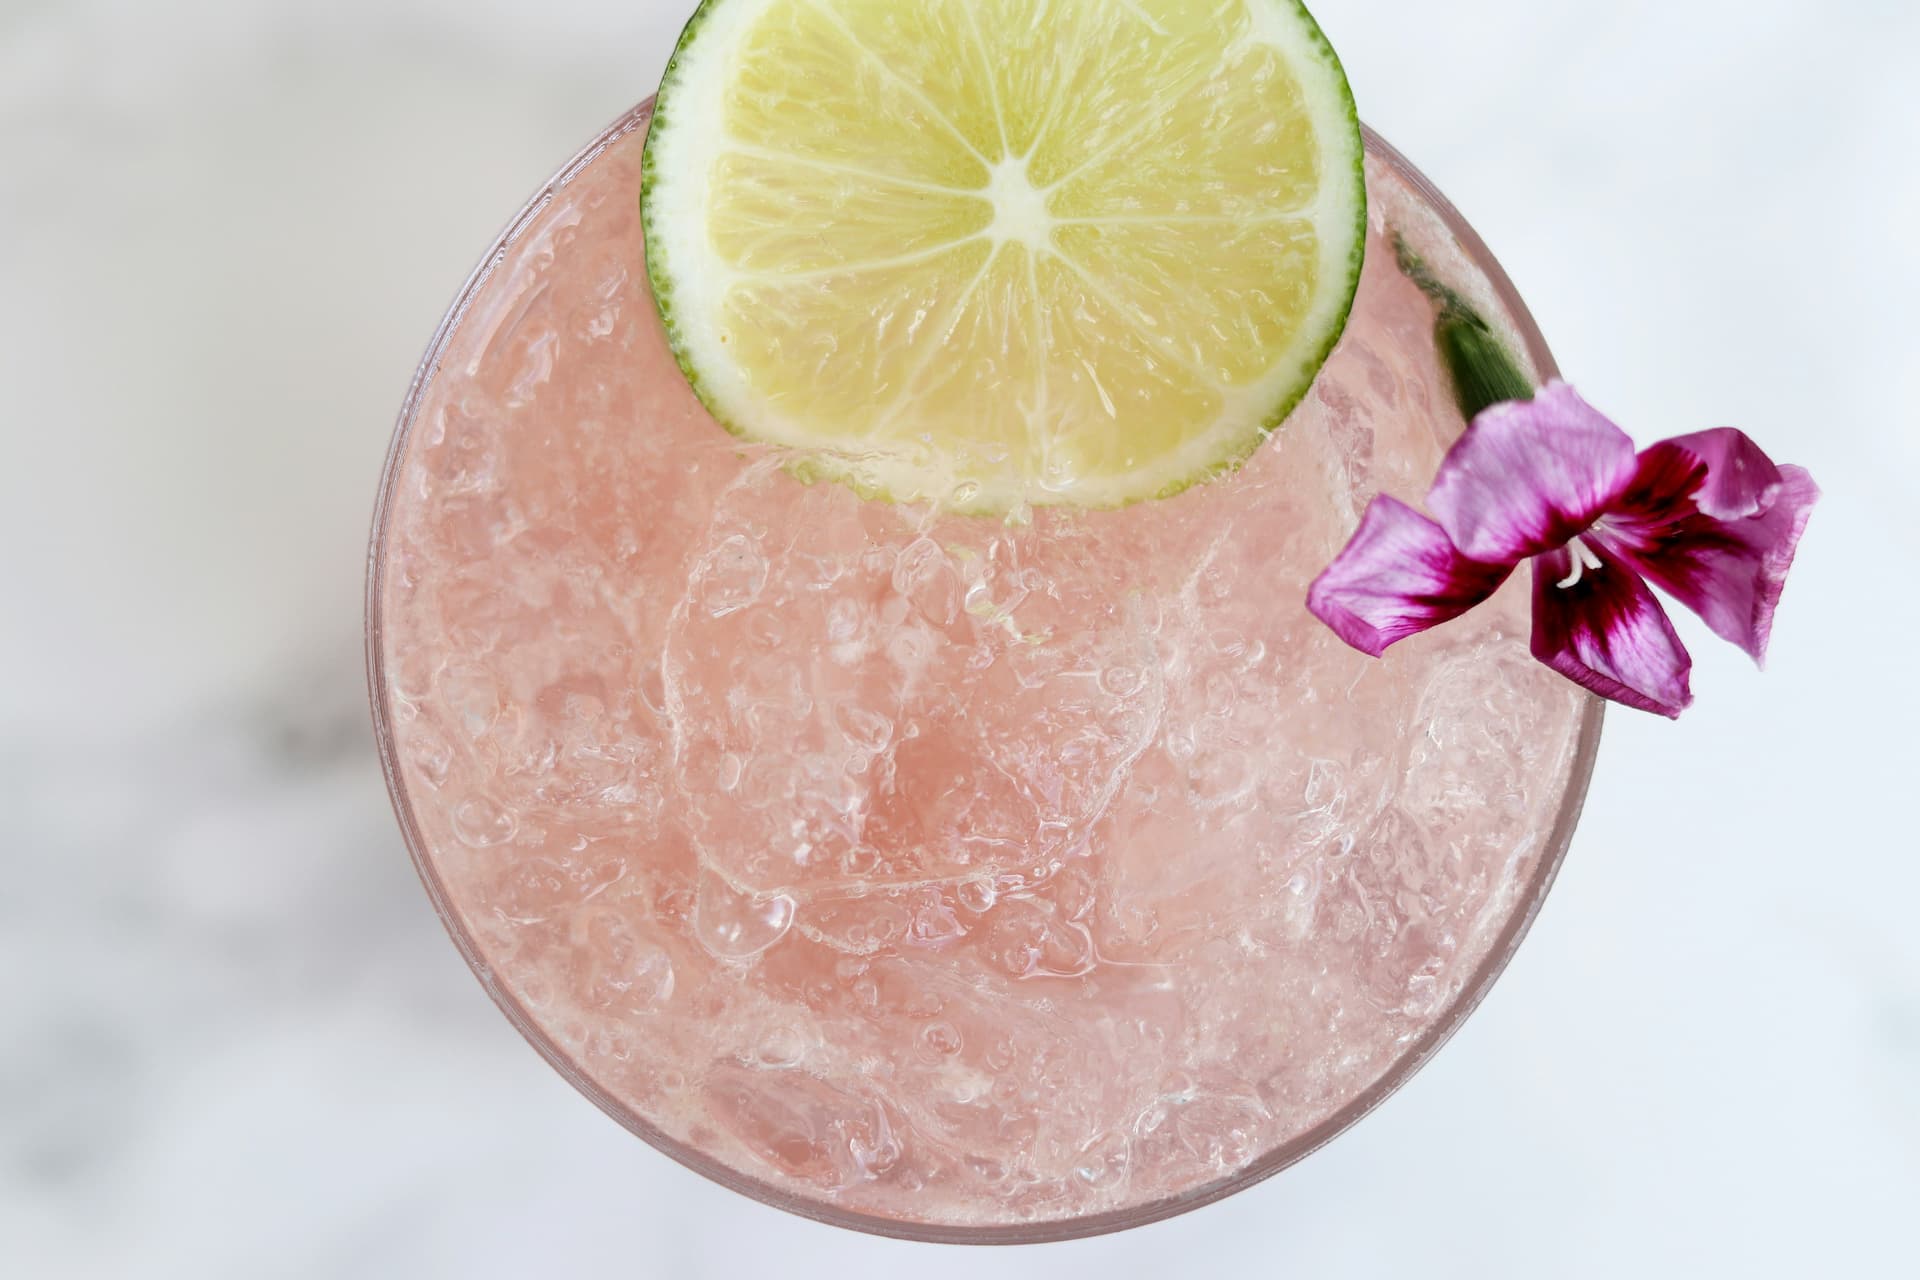 A Beginner’s Guide to Crafting the Perfect Spring Drink—Or Just About Anytime!